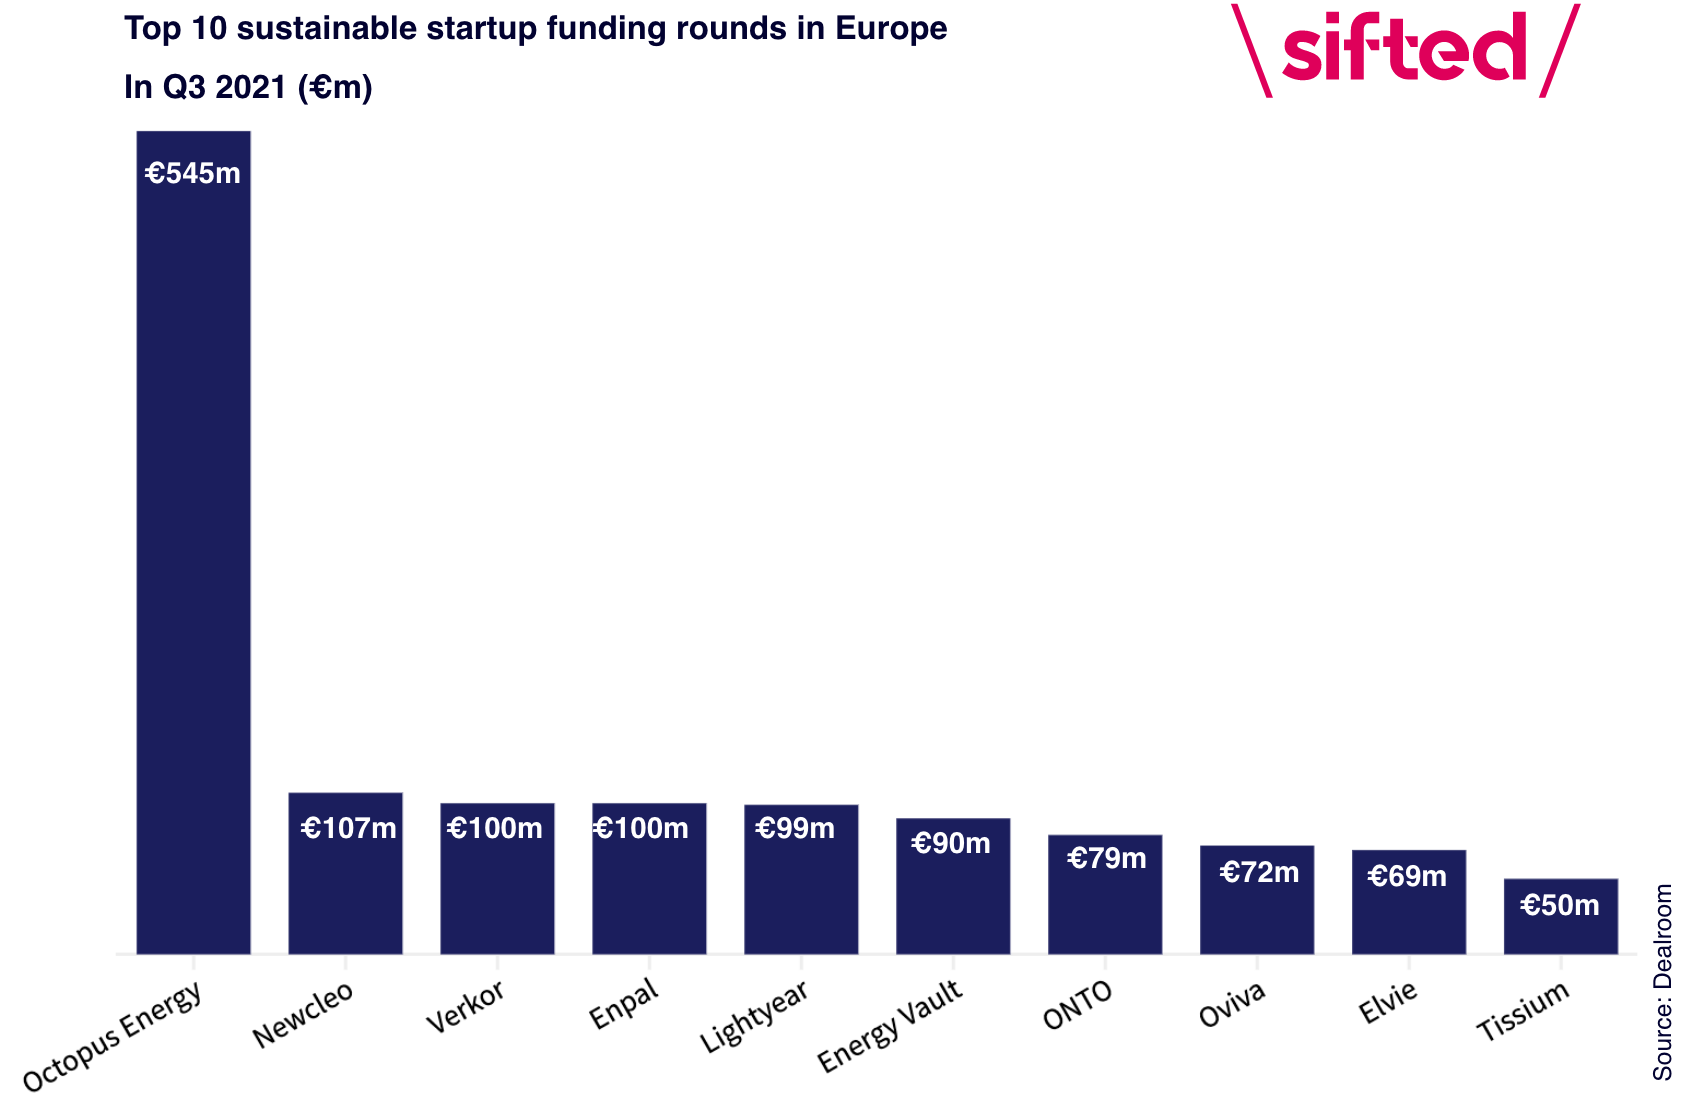 Top 10 sustainable startups with most investment in Q3 2021